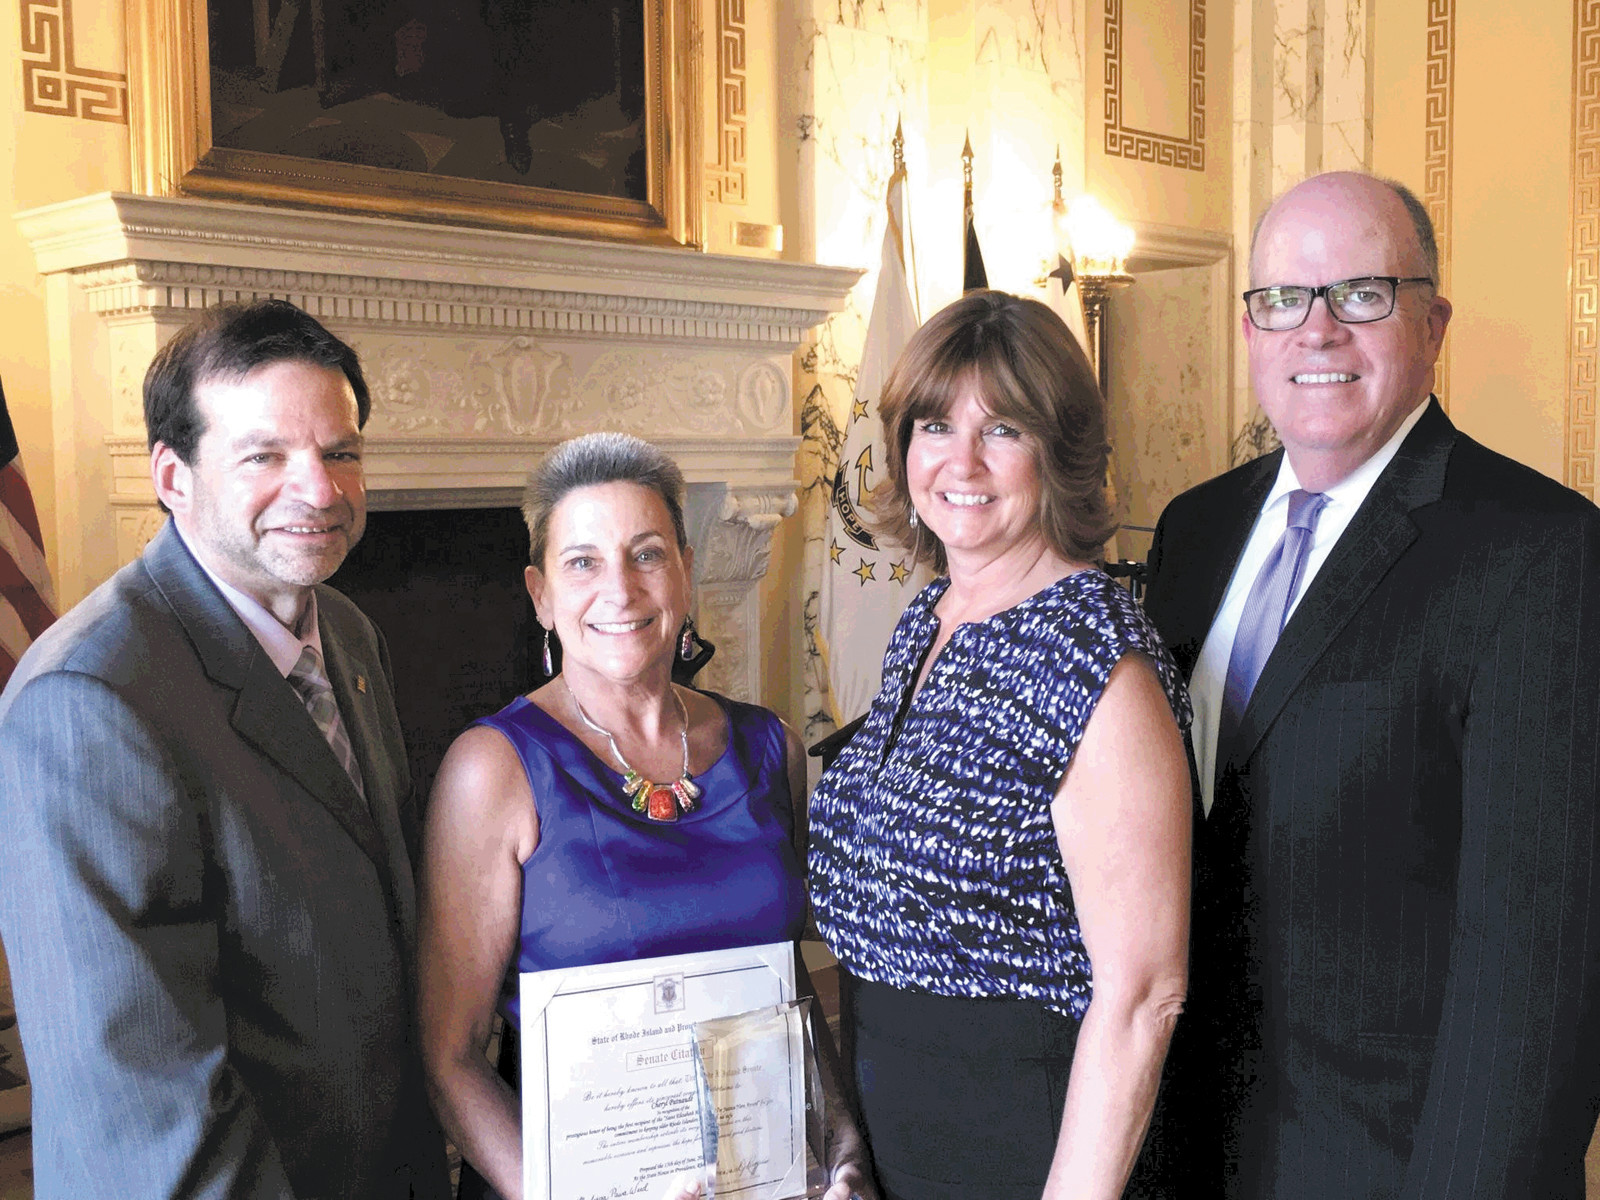 ELDER JUSTICE HERO: Cheryl Patnaude was awarded the Elder Justice Hero Award on Elder Abuse Awareness Day, June 15, at a ceremony at the State House. From left are Steve Horowitz, president and CEO Saint Elizabeth Community, Patnaude, Kathy Parker Director of admissions Saint Elizabeth Community and Charles Fogarty director of the division of elderly affairs.